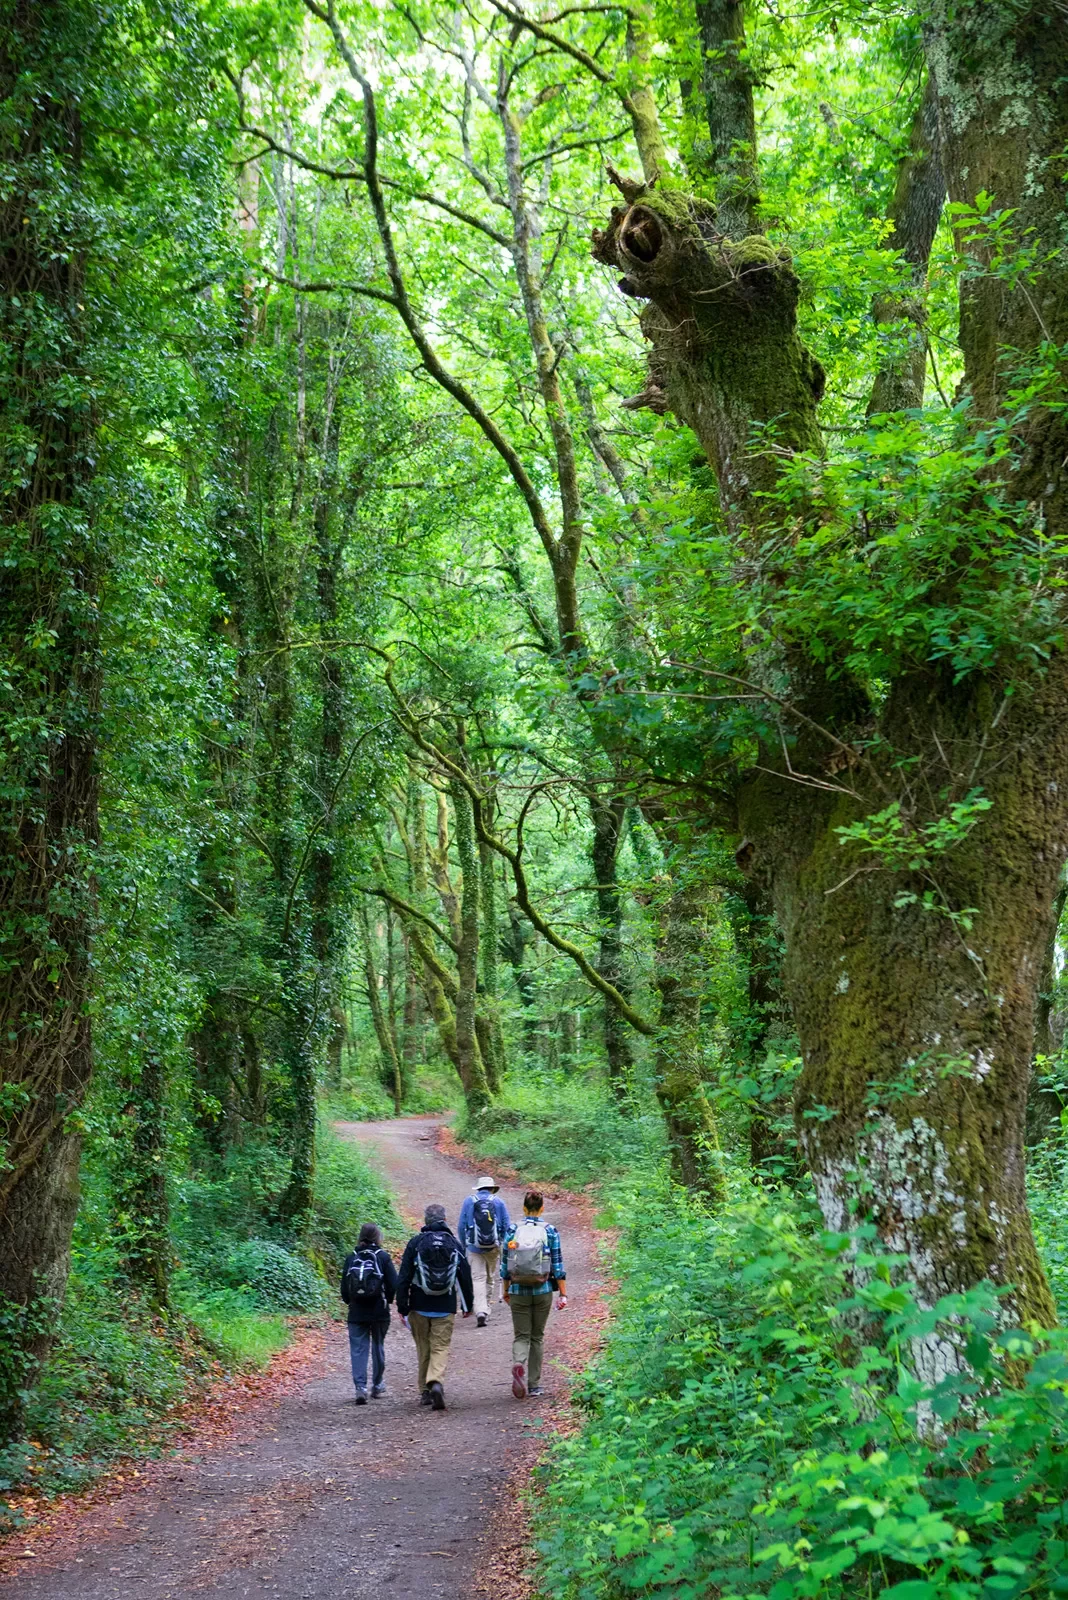 Four guests walking through verdant forest trail, tall trees around.